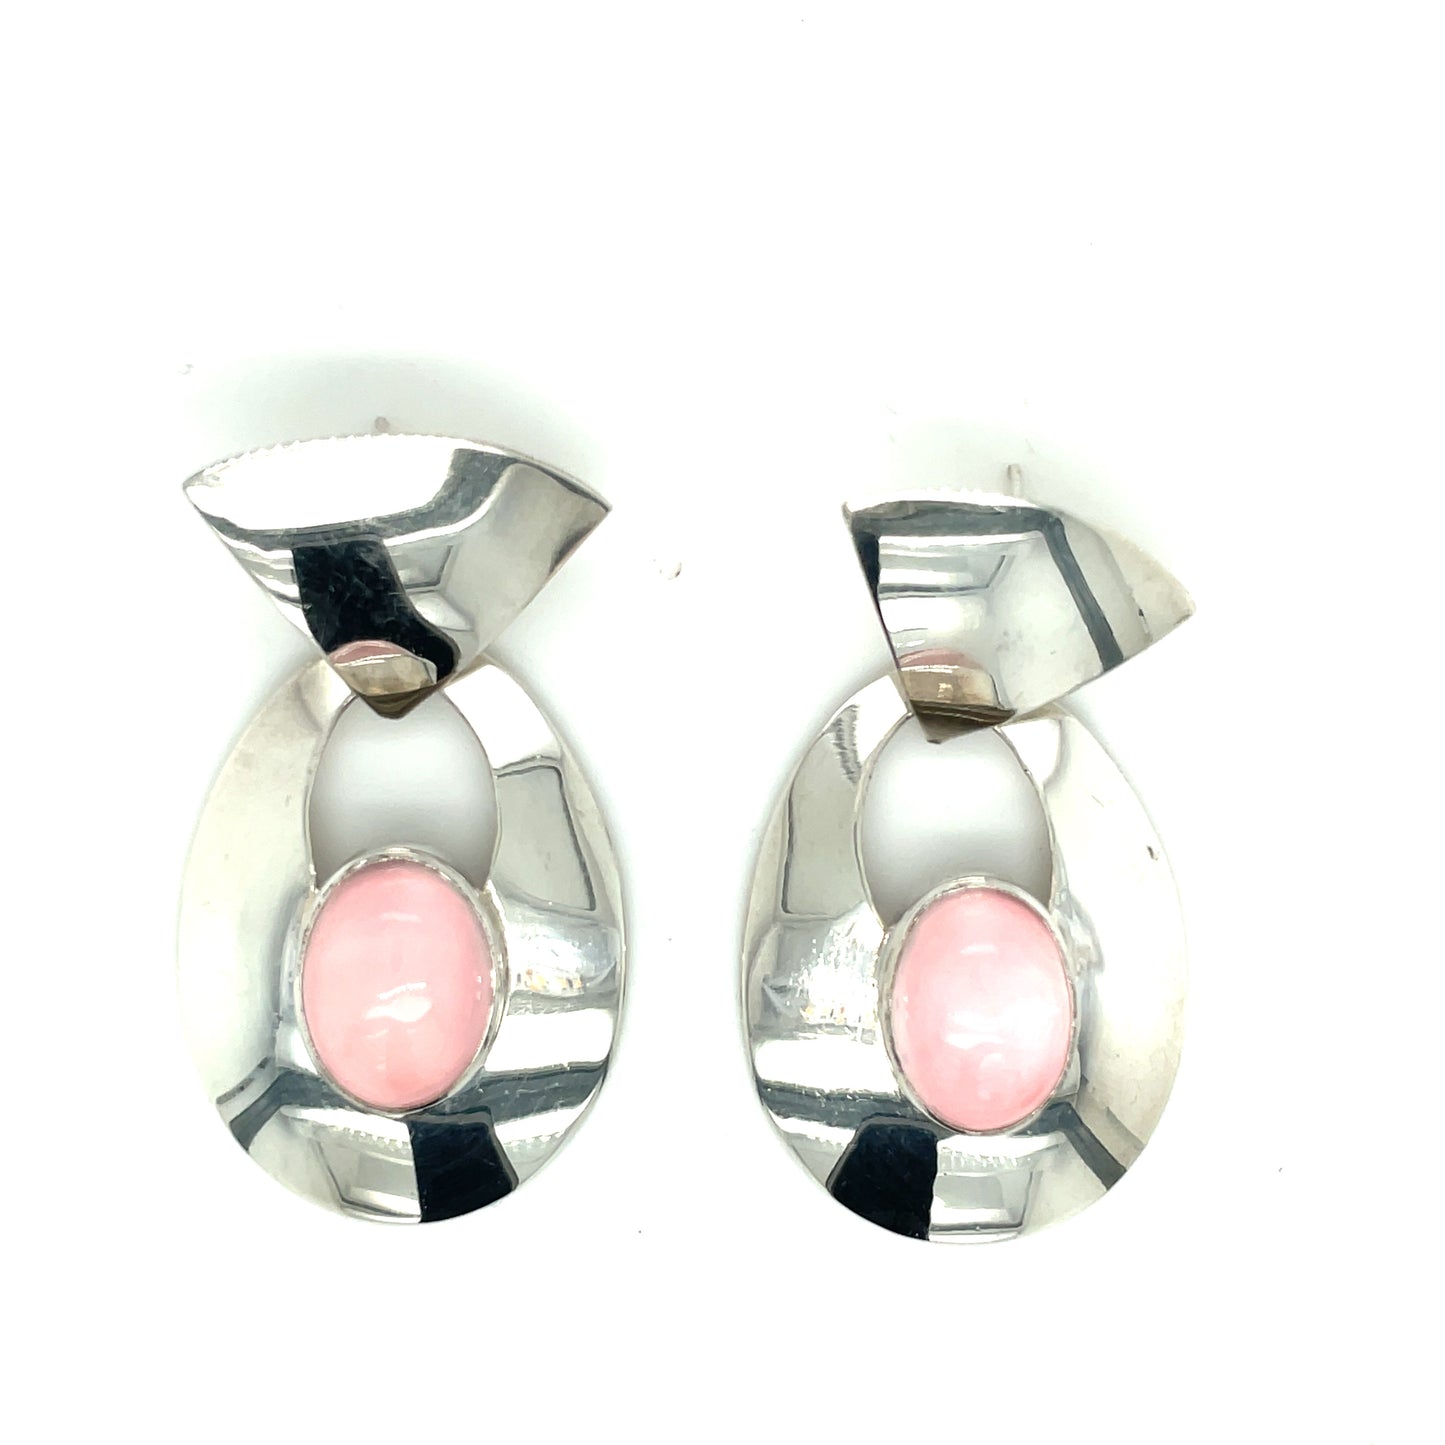 Vintage Silver And Pink Moonstone Drop Earrings Signed CDF 1987